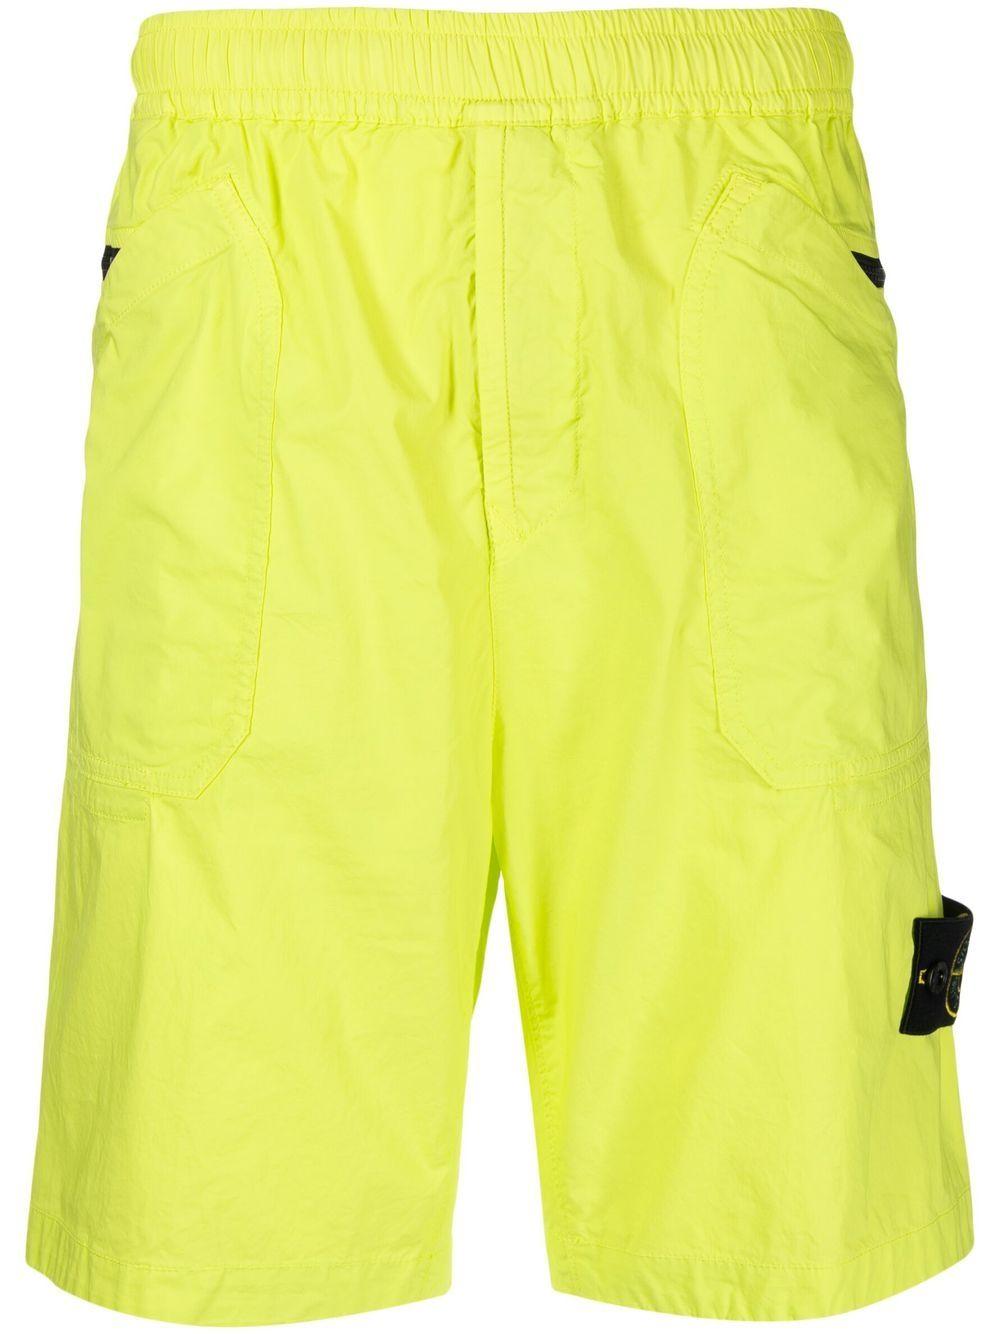 Stone Island Cotton Compass-patch Bermuda Shorts in Yellow for Men - Lyst